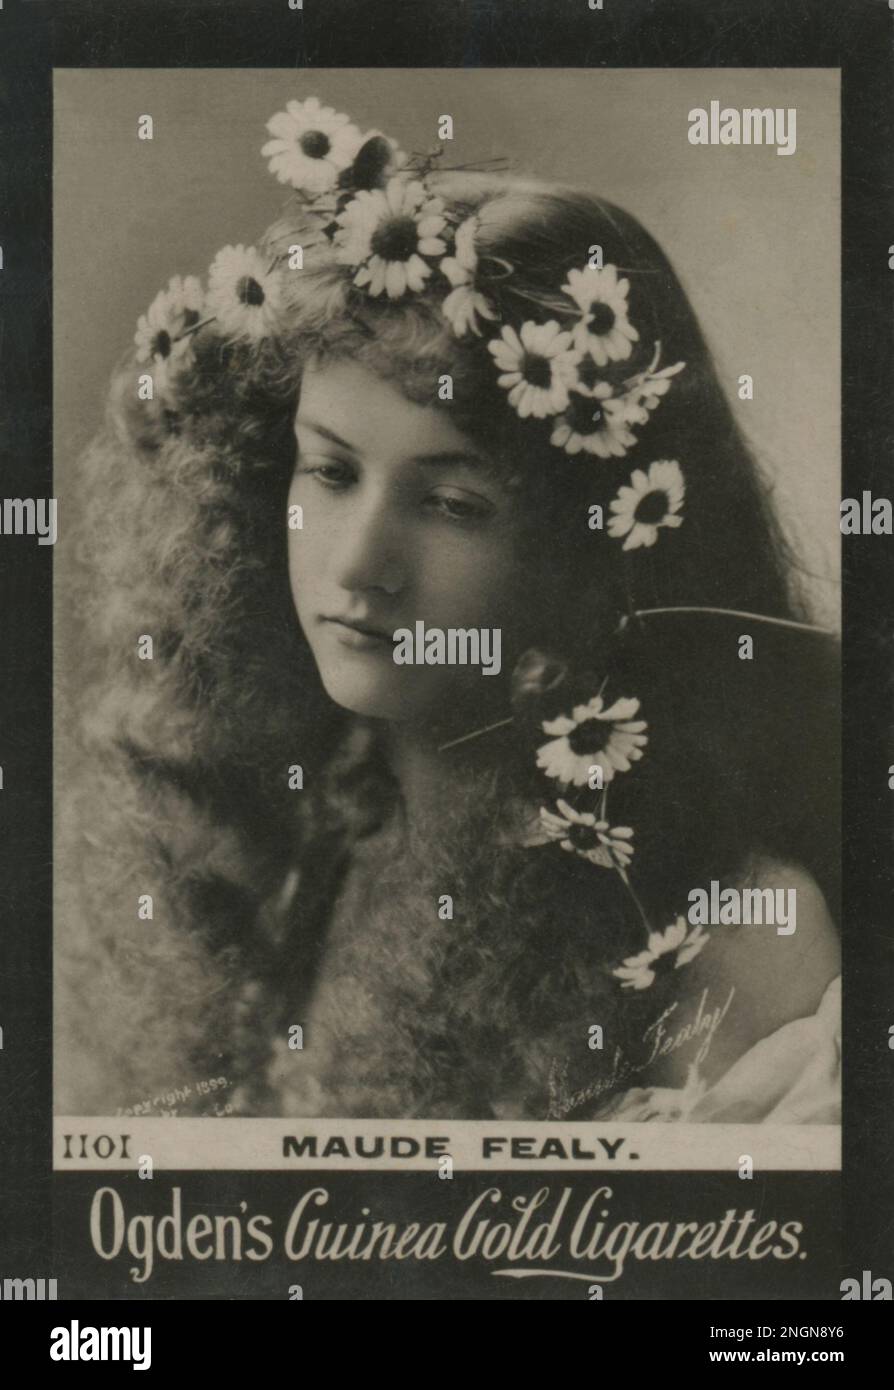 Maude Fealy as Ophelia - photo by James Purdy (Boston) 1899 - restored from original Ogden's Guinea Gold cigarette card #1101 by Montana Photographer Stock Photo